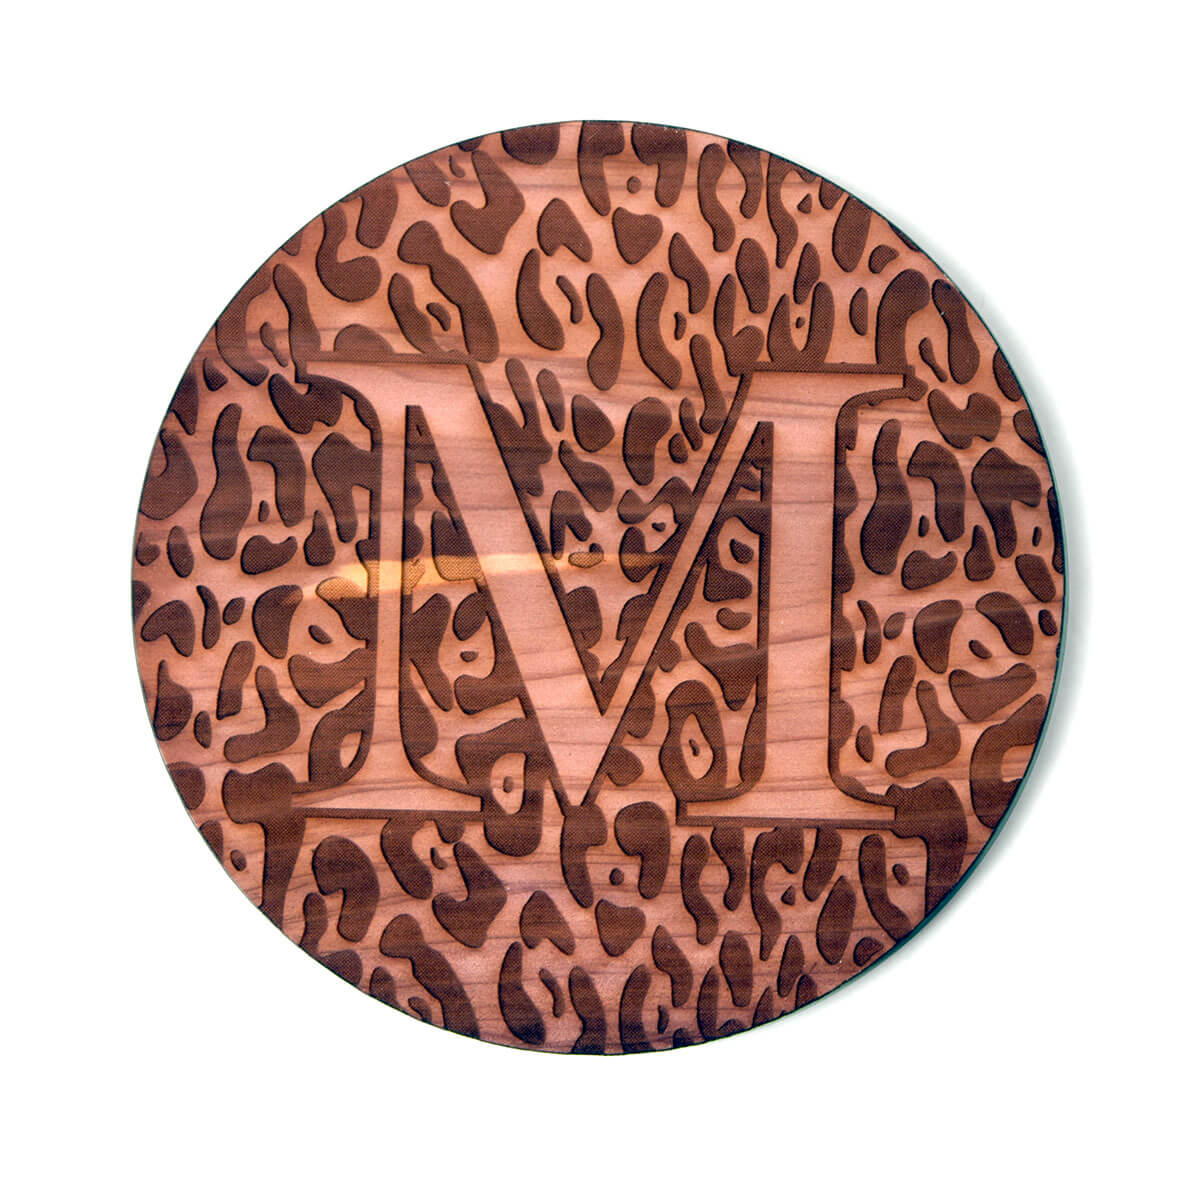 Personalized coaster set, single initial letter S over animal print, cedar wood